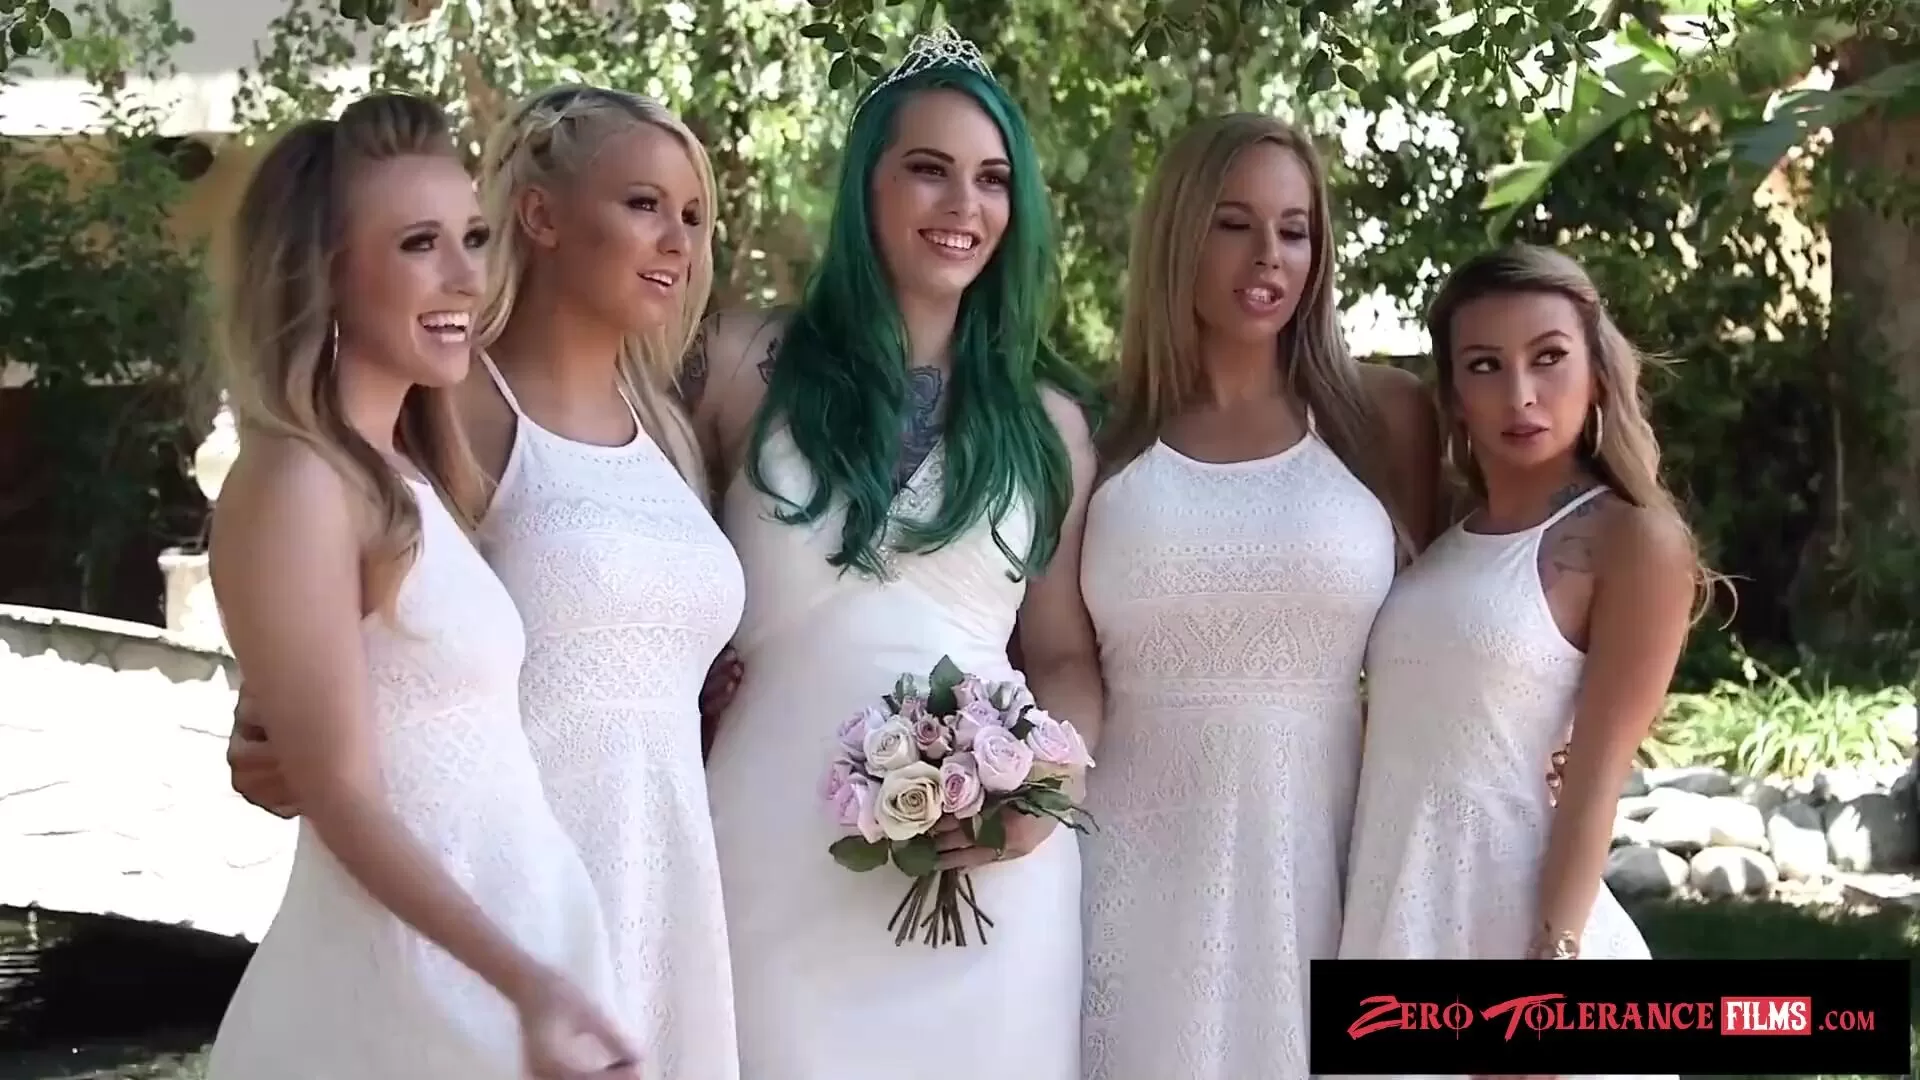 Real wedding orgy of perverted bride, groom and their friends photo